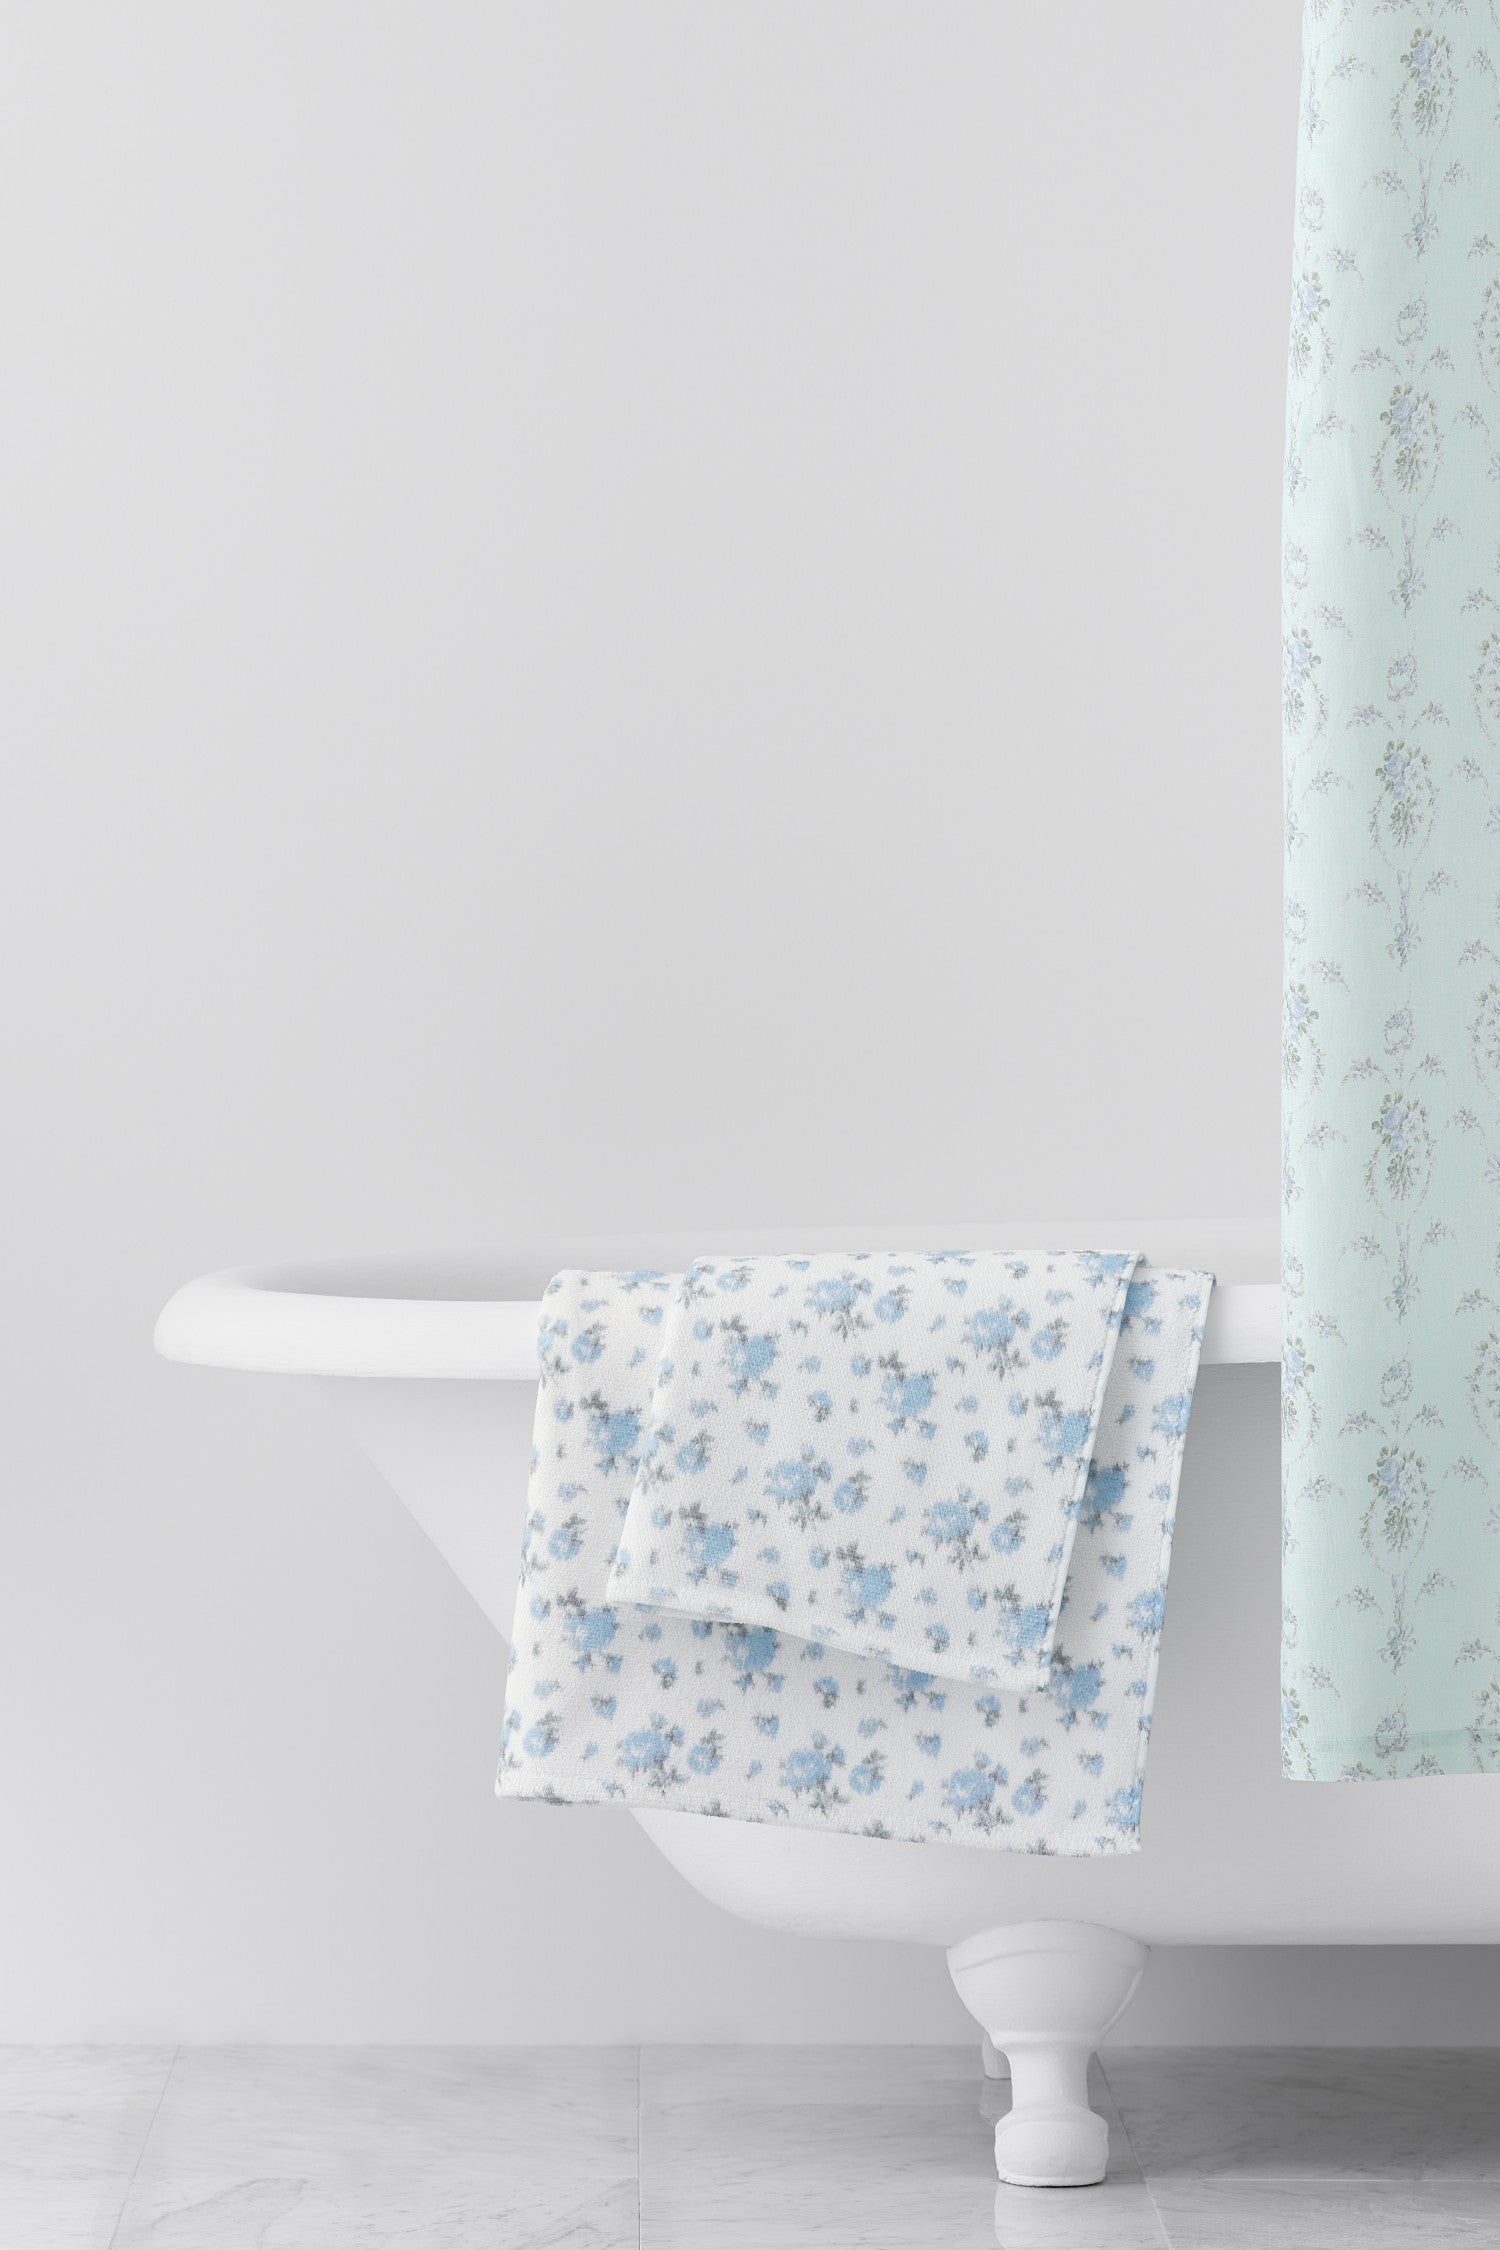 vintage-inspired delicate repeating mini floral print bath towel in a soft blue against a white back